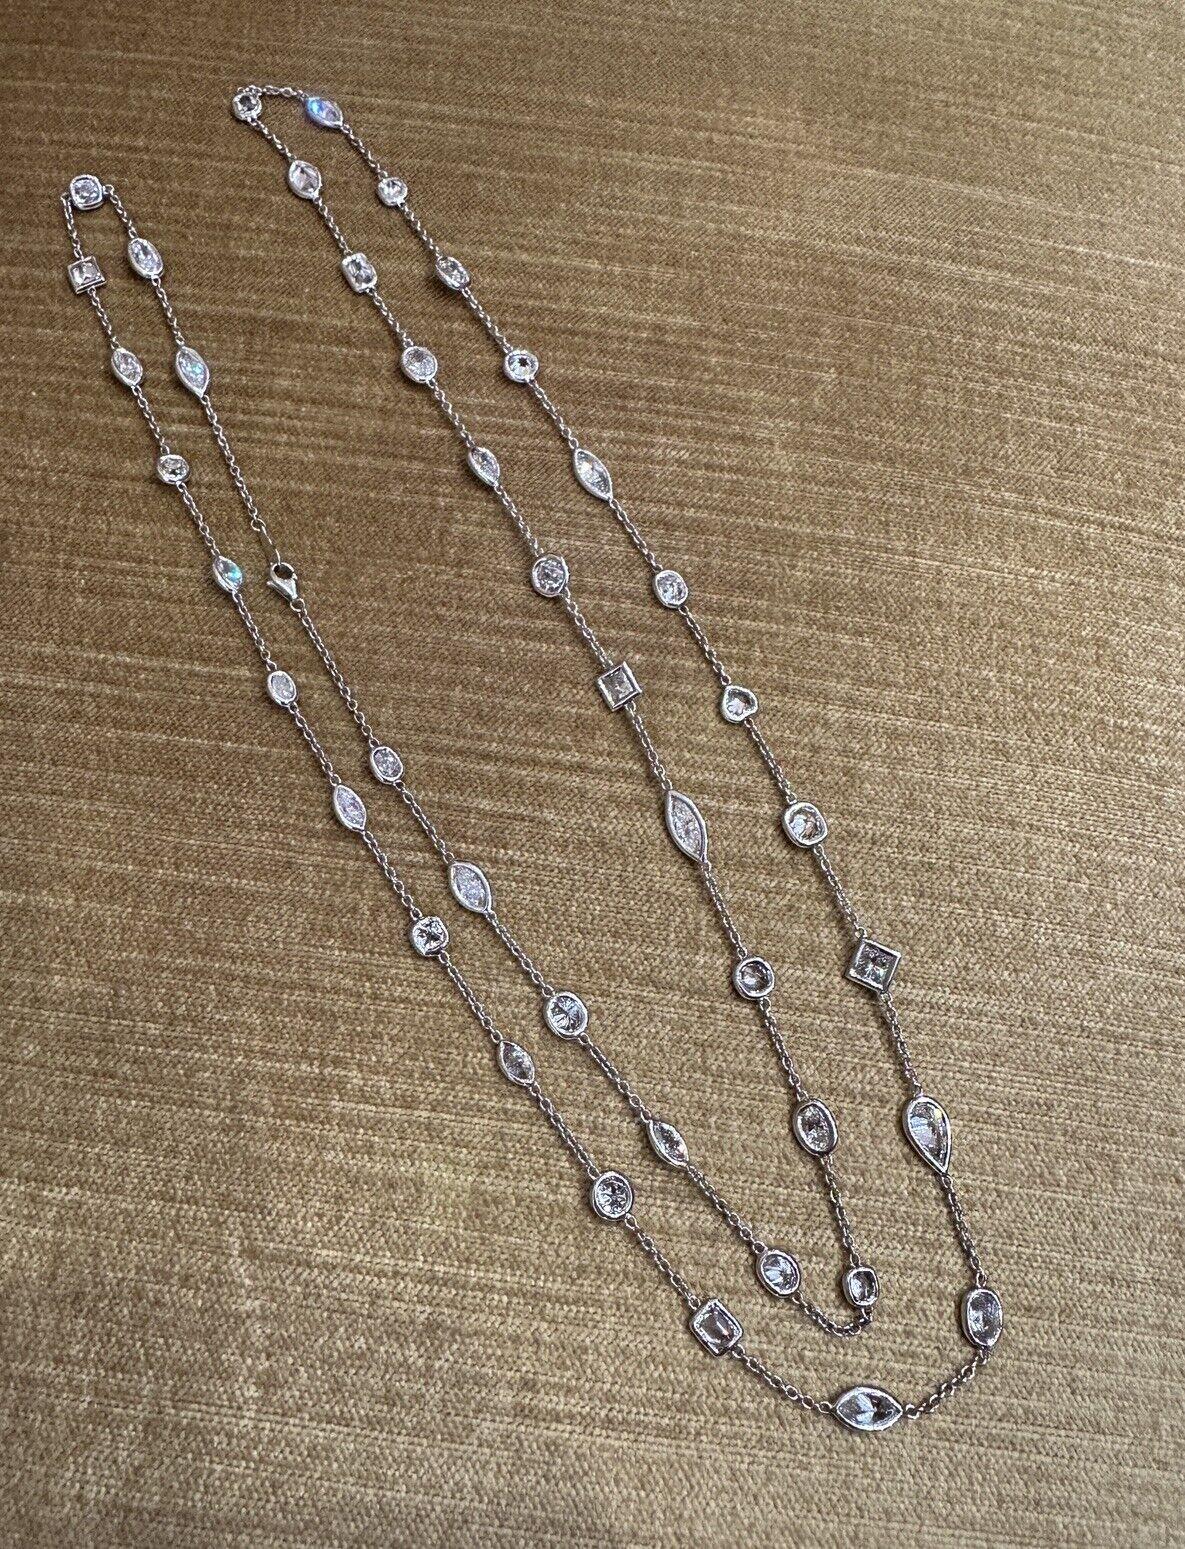 21 Carats + Fancy Shape Diamond By the Yard Necklace in Platinum 36 inches In Excellent Condition For Sale In La Jolla, CA